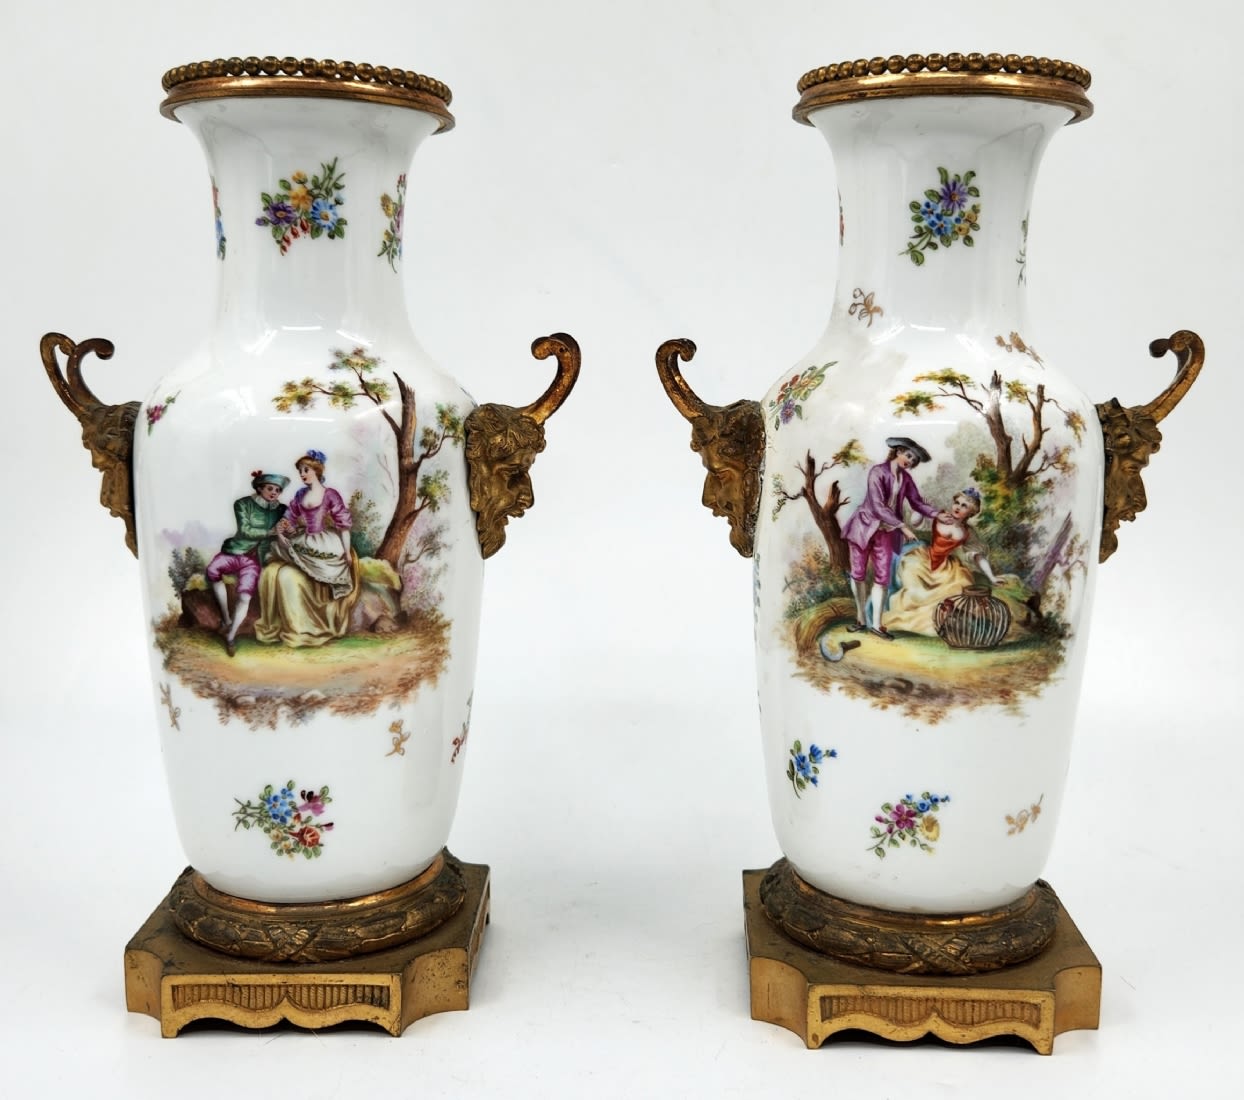 Antique French vase in 'Sevres' style, a beautiful and high-quality antique French vase from the - Image 10 of 12